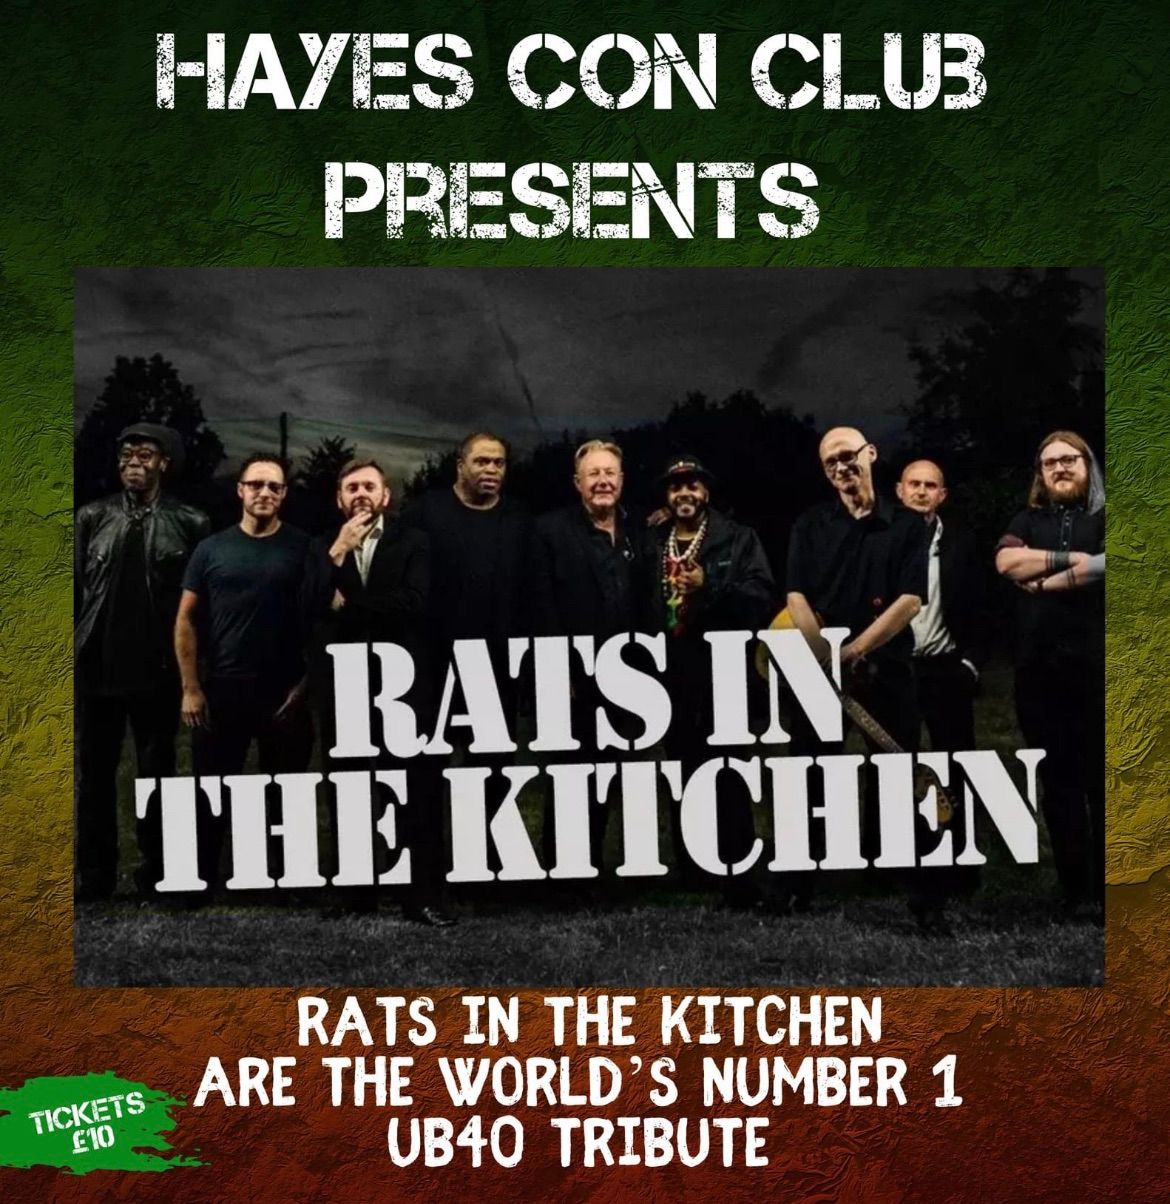 Rats in the Kitchen - UB40 Tribute Band 